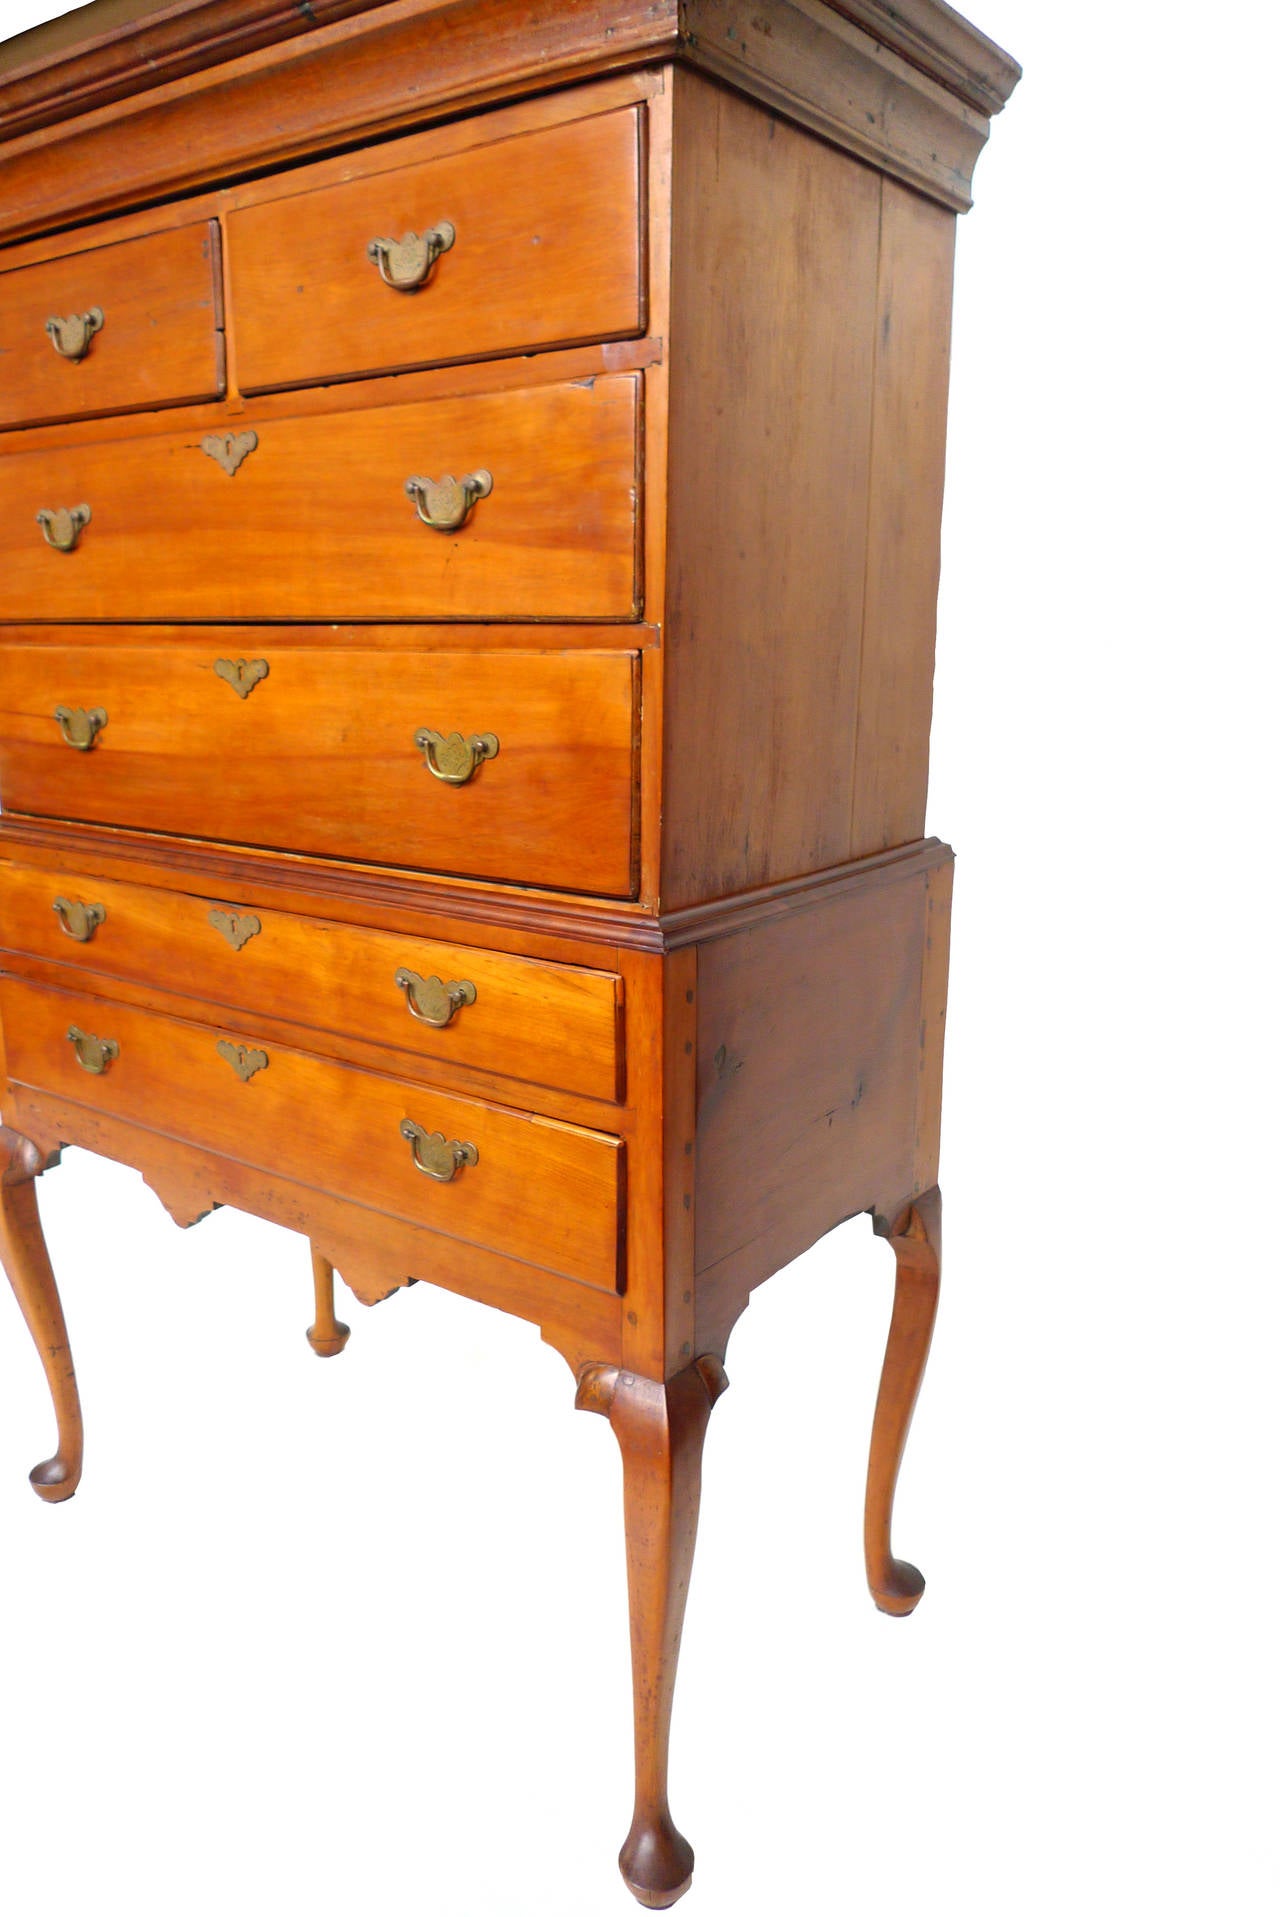 Like many Queen Anne-styled Connecticut highboys (circa 1740-1760), this flattop piece has an elegant and austere design. Dovetailed joints characterize its stabile and sturdy build, constructed from tiger maple and heart-pine wood. Brass pulls with